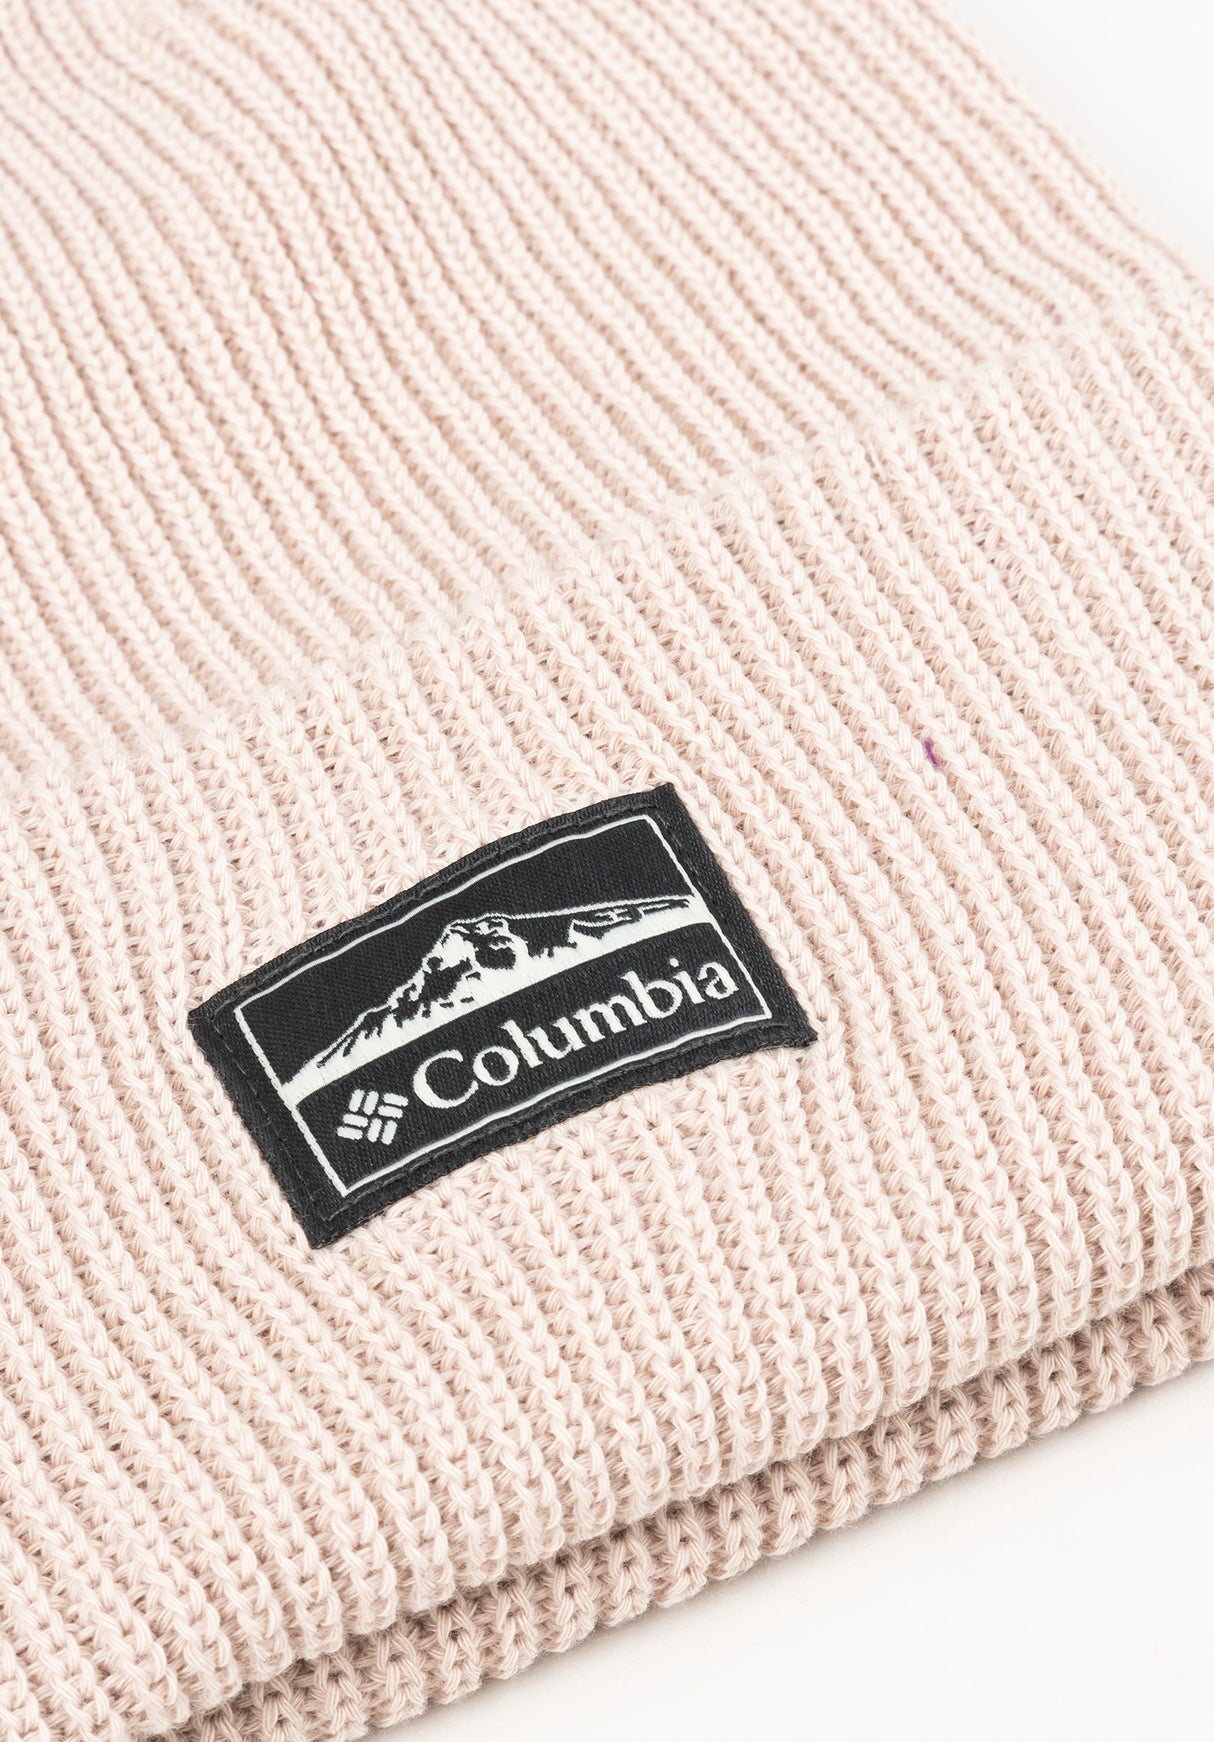 Lost Lager II Columbia Beanie in ancientfossil for Women – TITUS